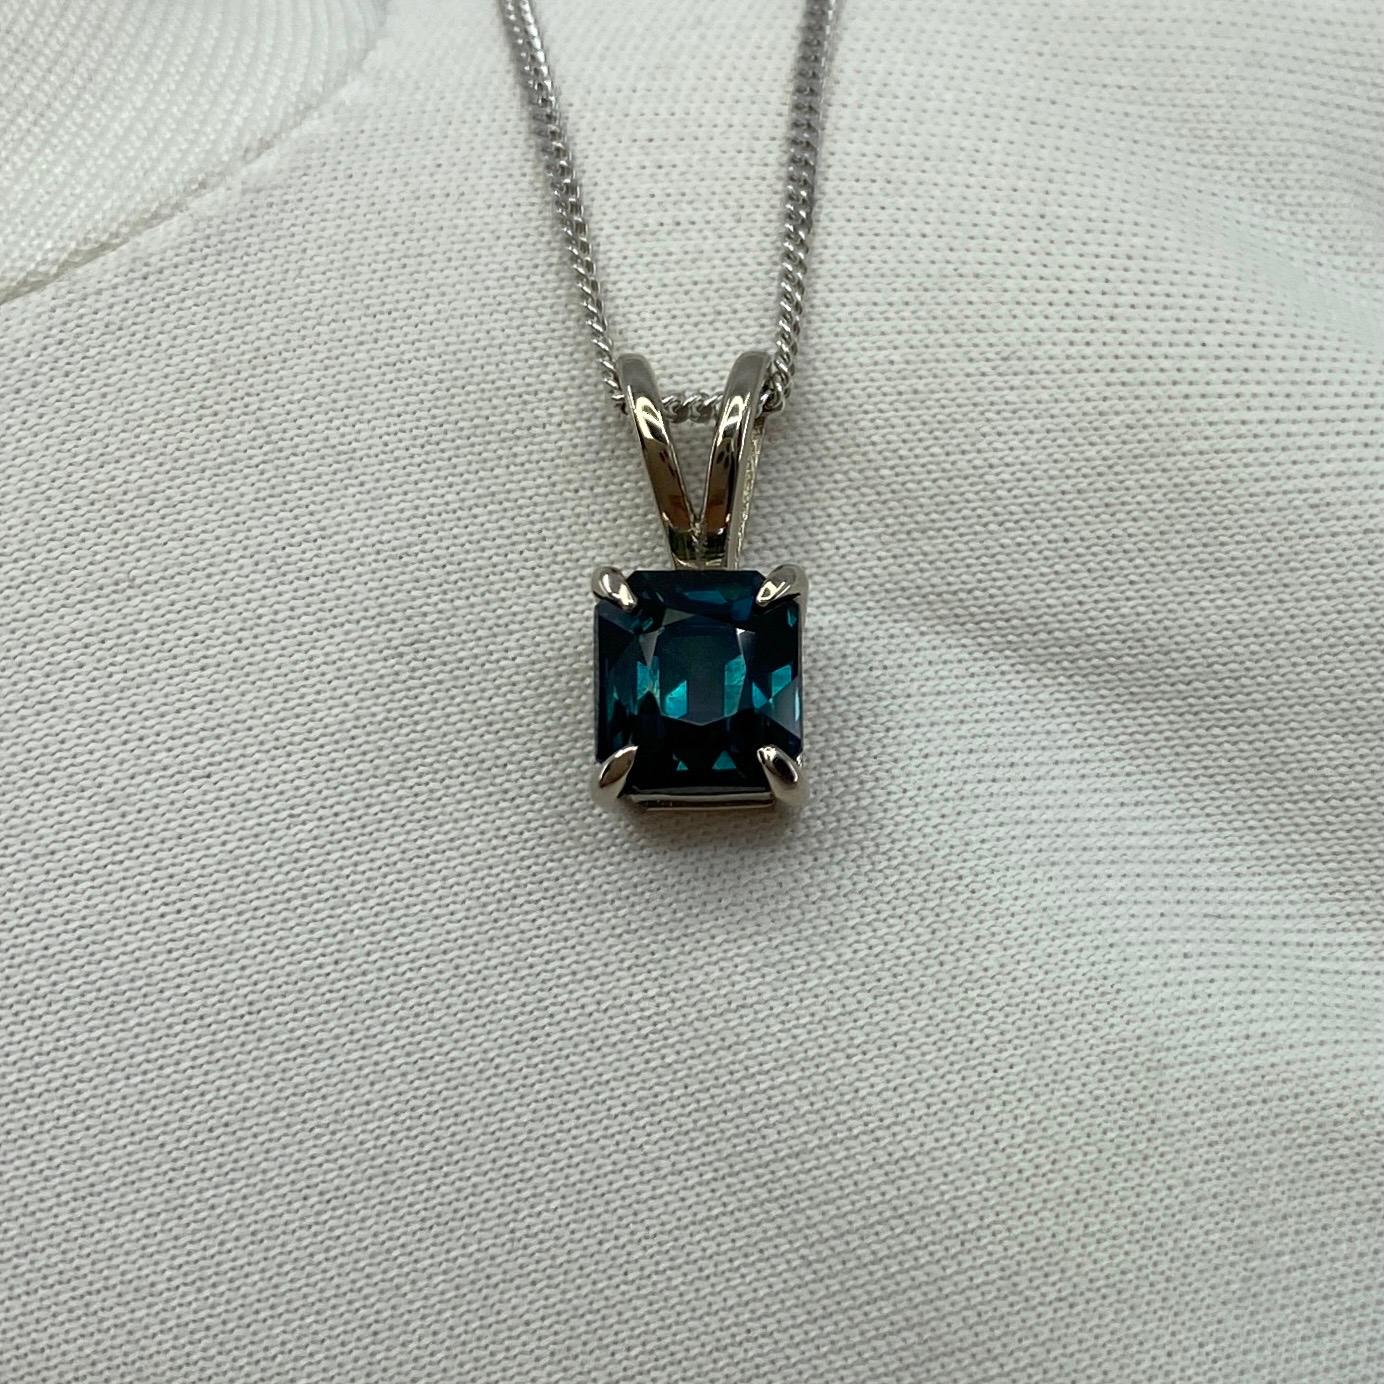 1.44ct IGI Certified Deep Teal Blue Untreated Sapphire 18k White Gold Pendant For Sale 1